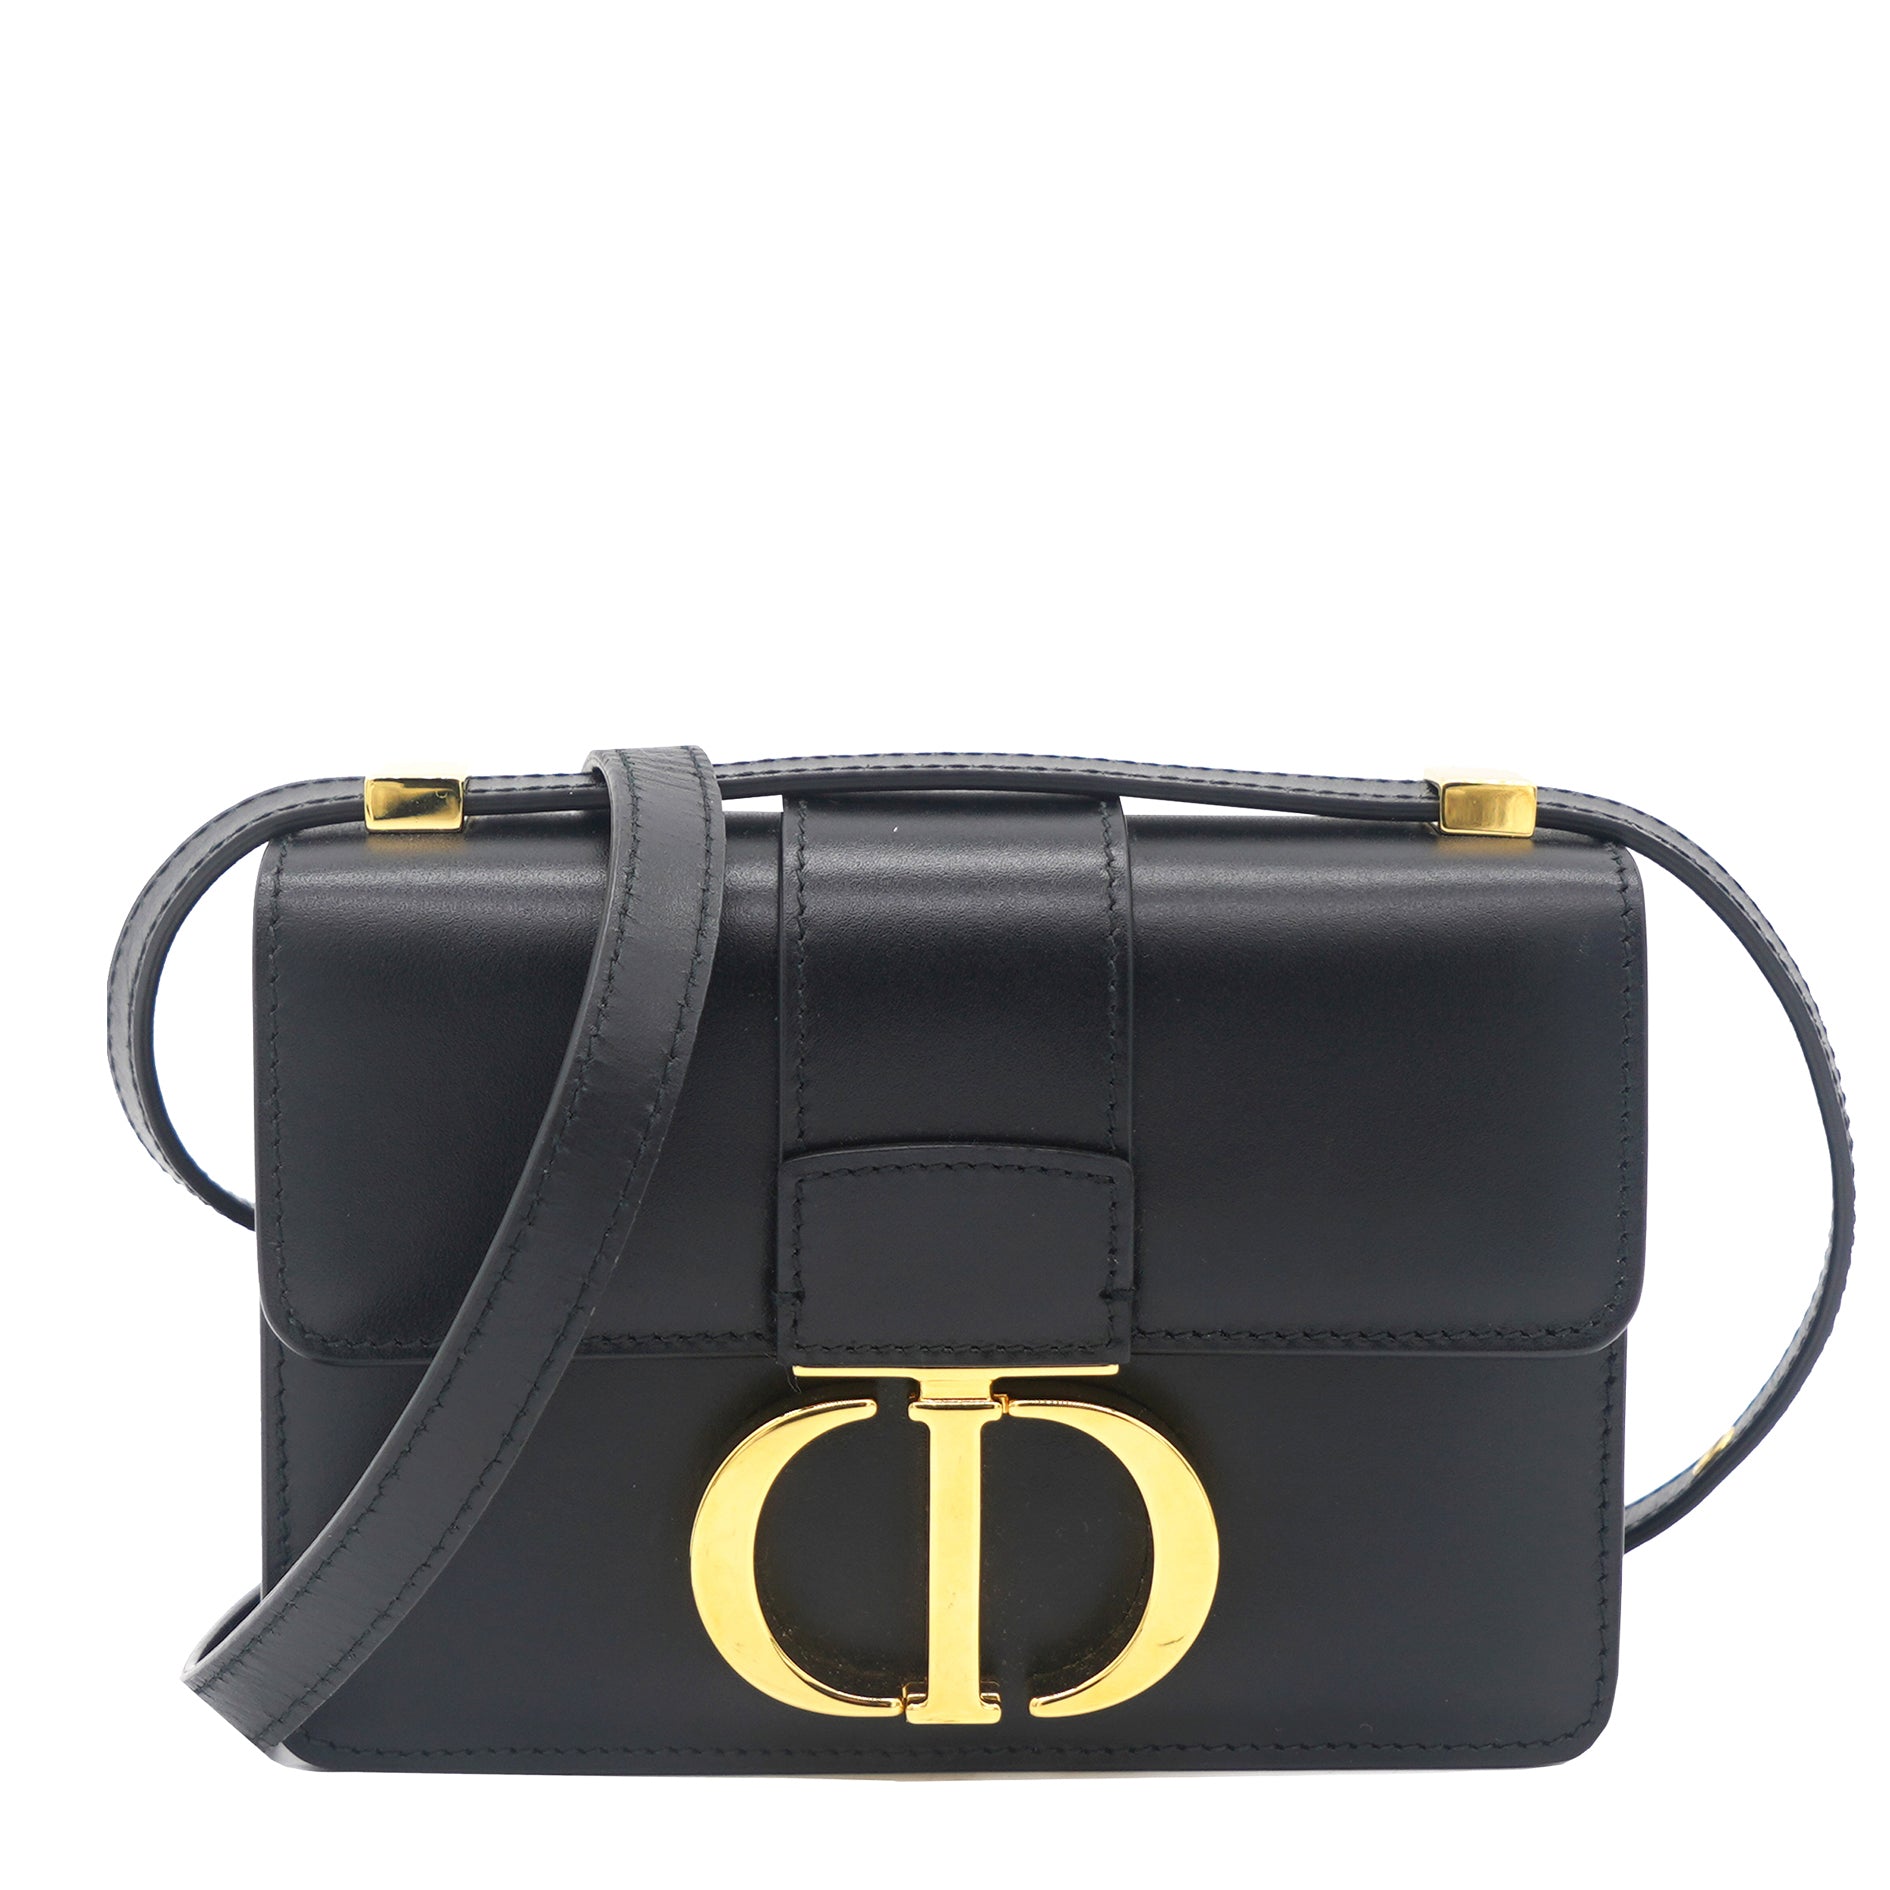 Dior Launches the 30 Montaigne Bag in Honour of its Iconic Address